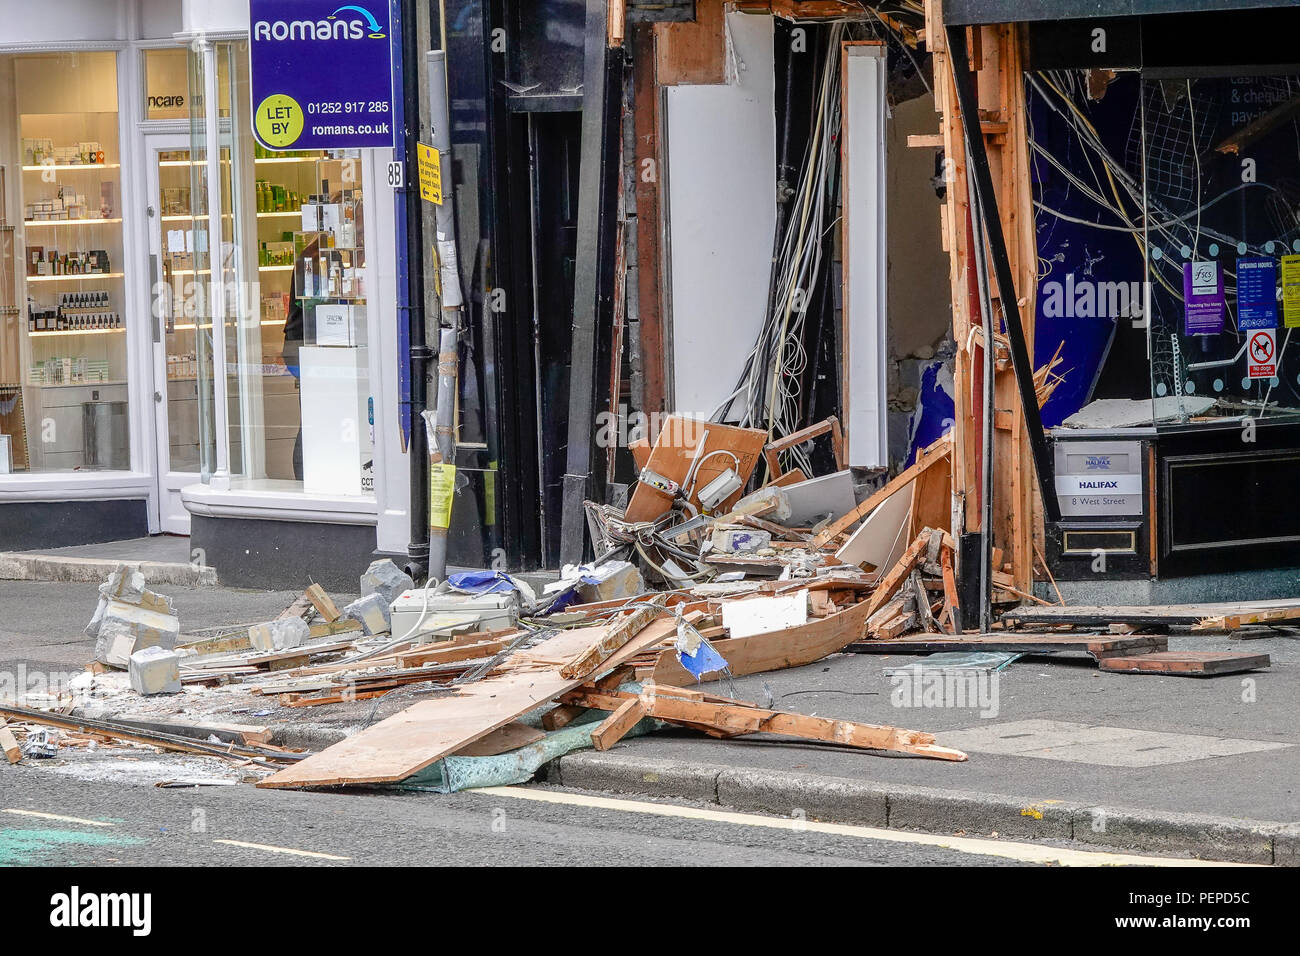 West Street, Farnham. 17th August 2018. Ram raiders struck again in south west Surrey overnight. They drove a JCB into the Halifax Building Society in Farnham before escaping with an ATM full of cash. Surrey Police have been in attendance throughout the day today. Credit: james jagger/Alamy Live News Stock Photo